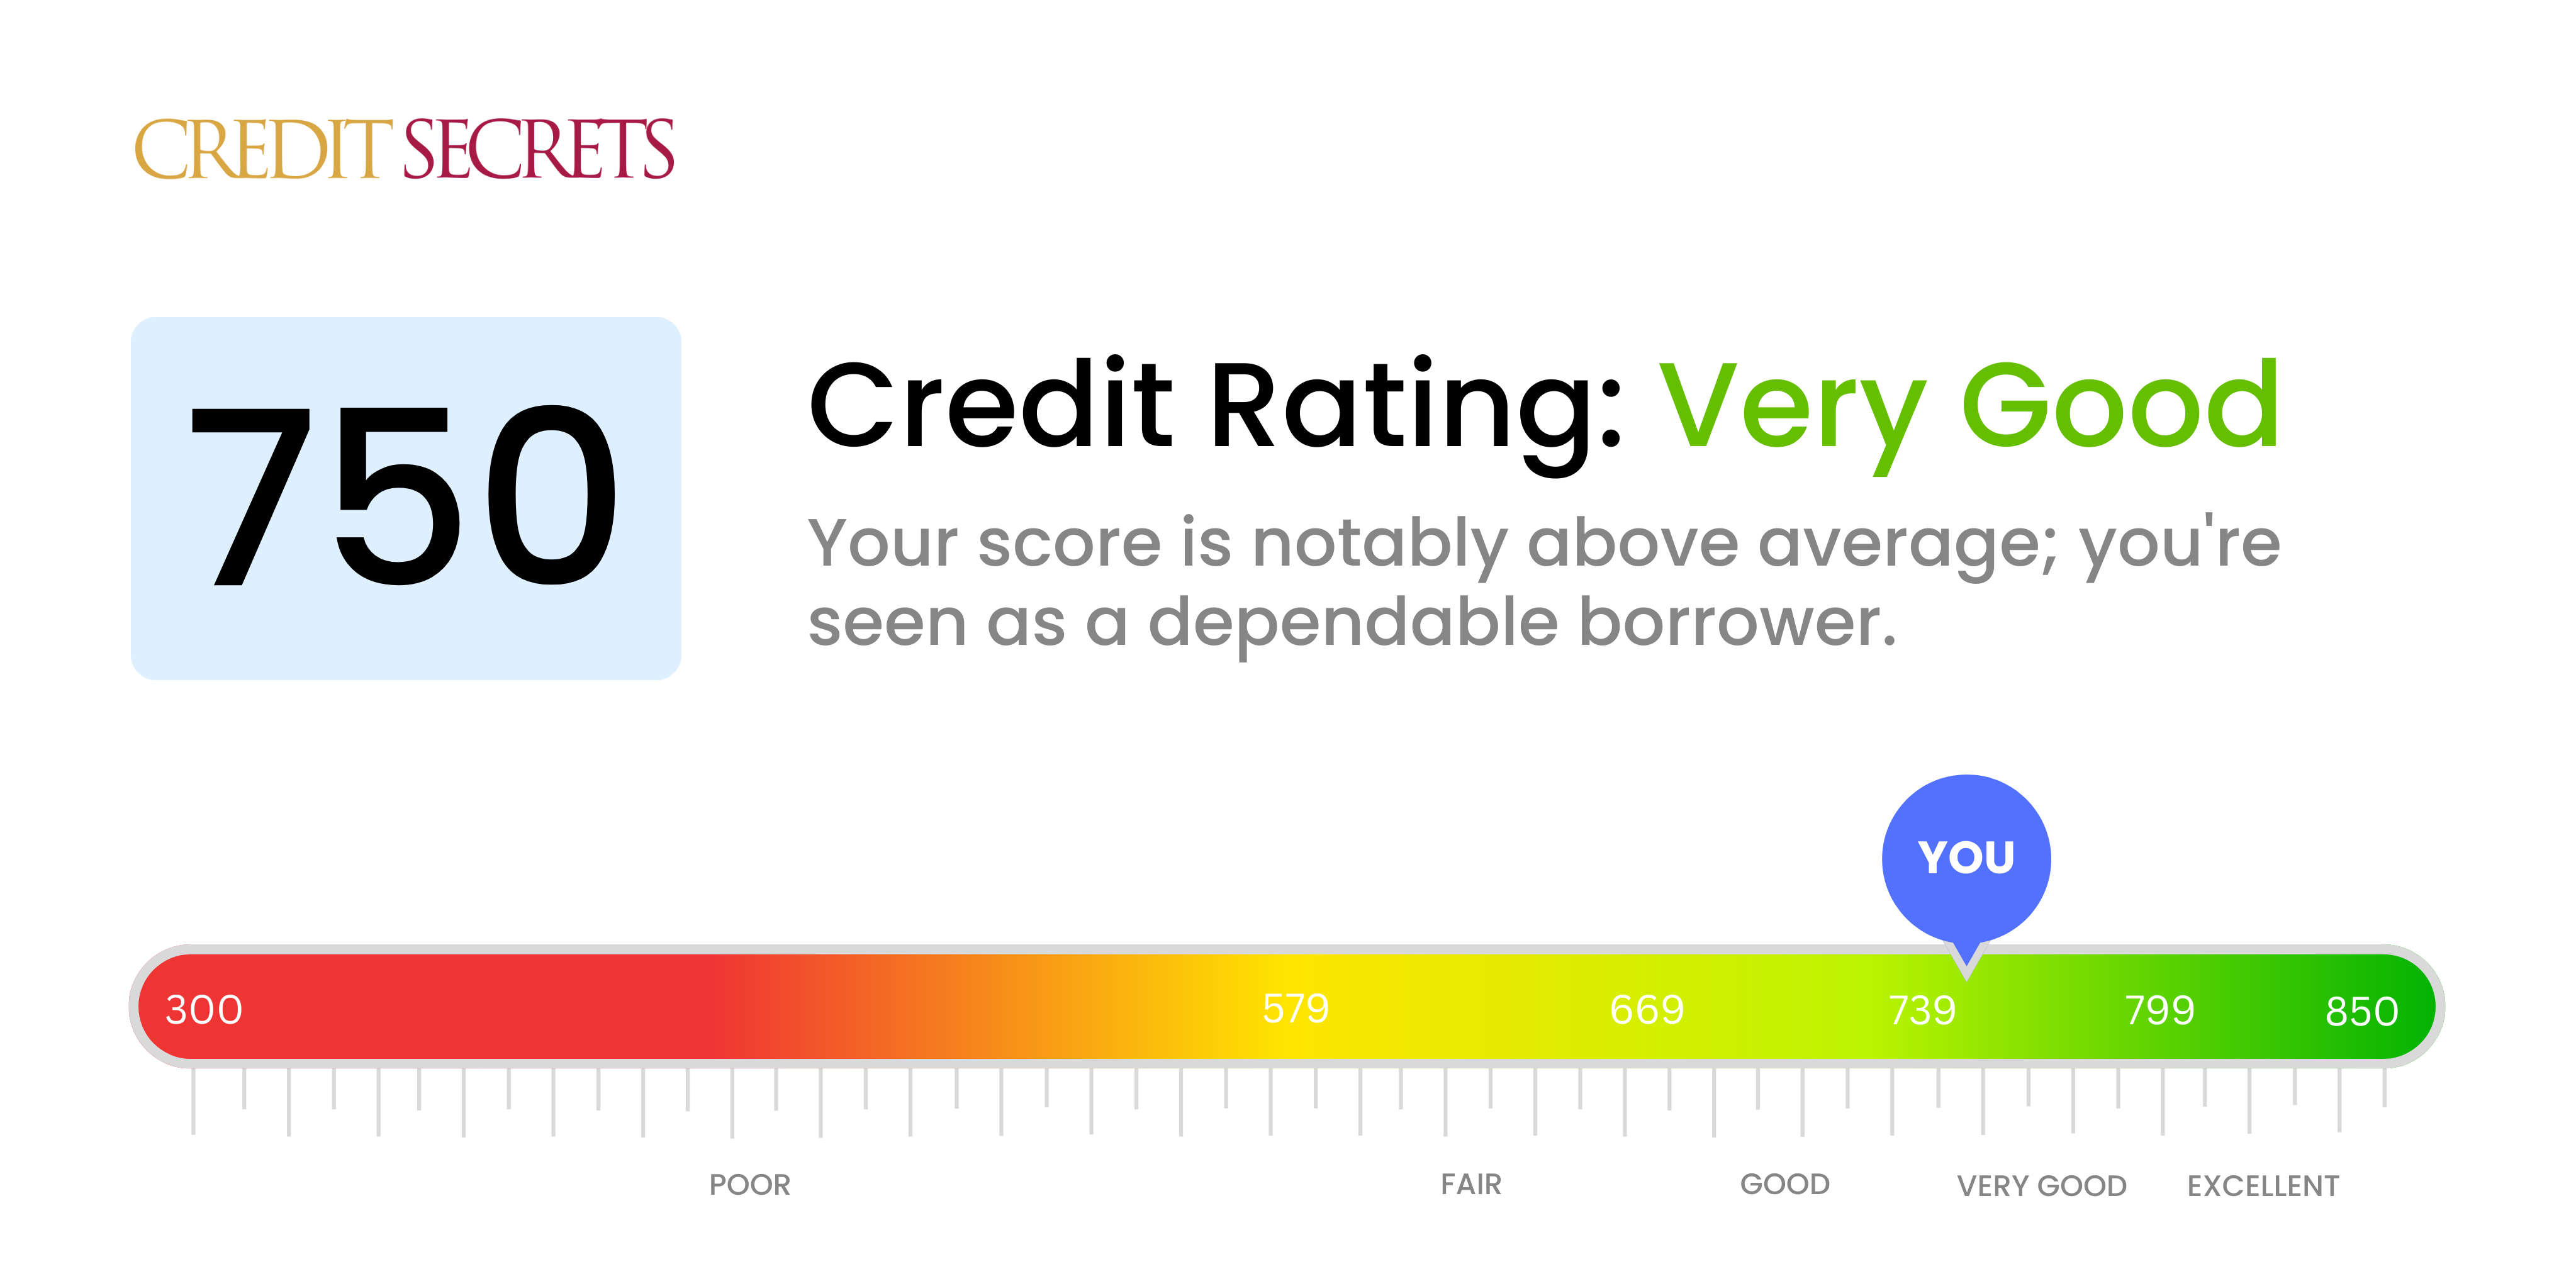 Is 750 a good credit score?